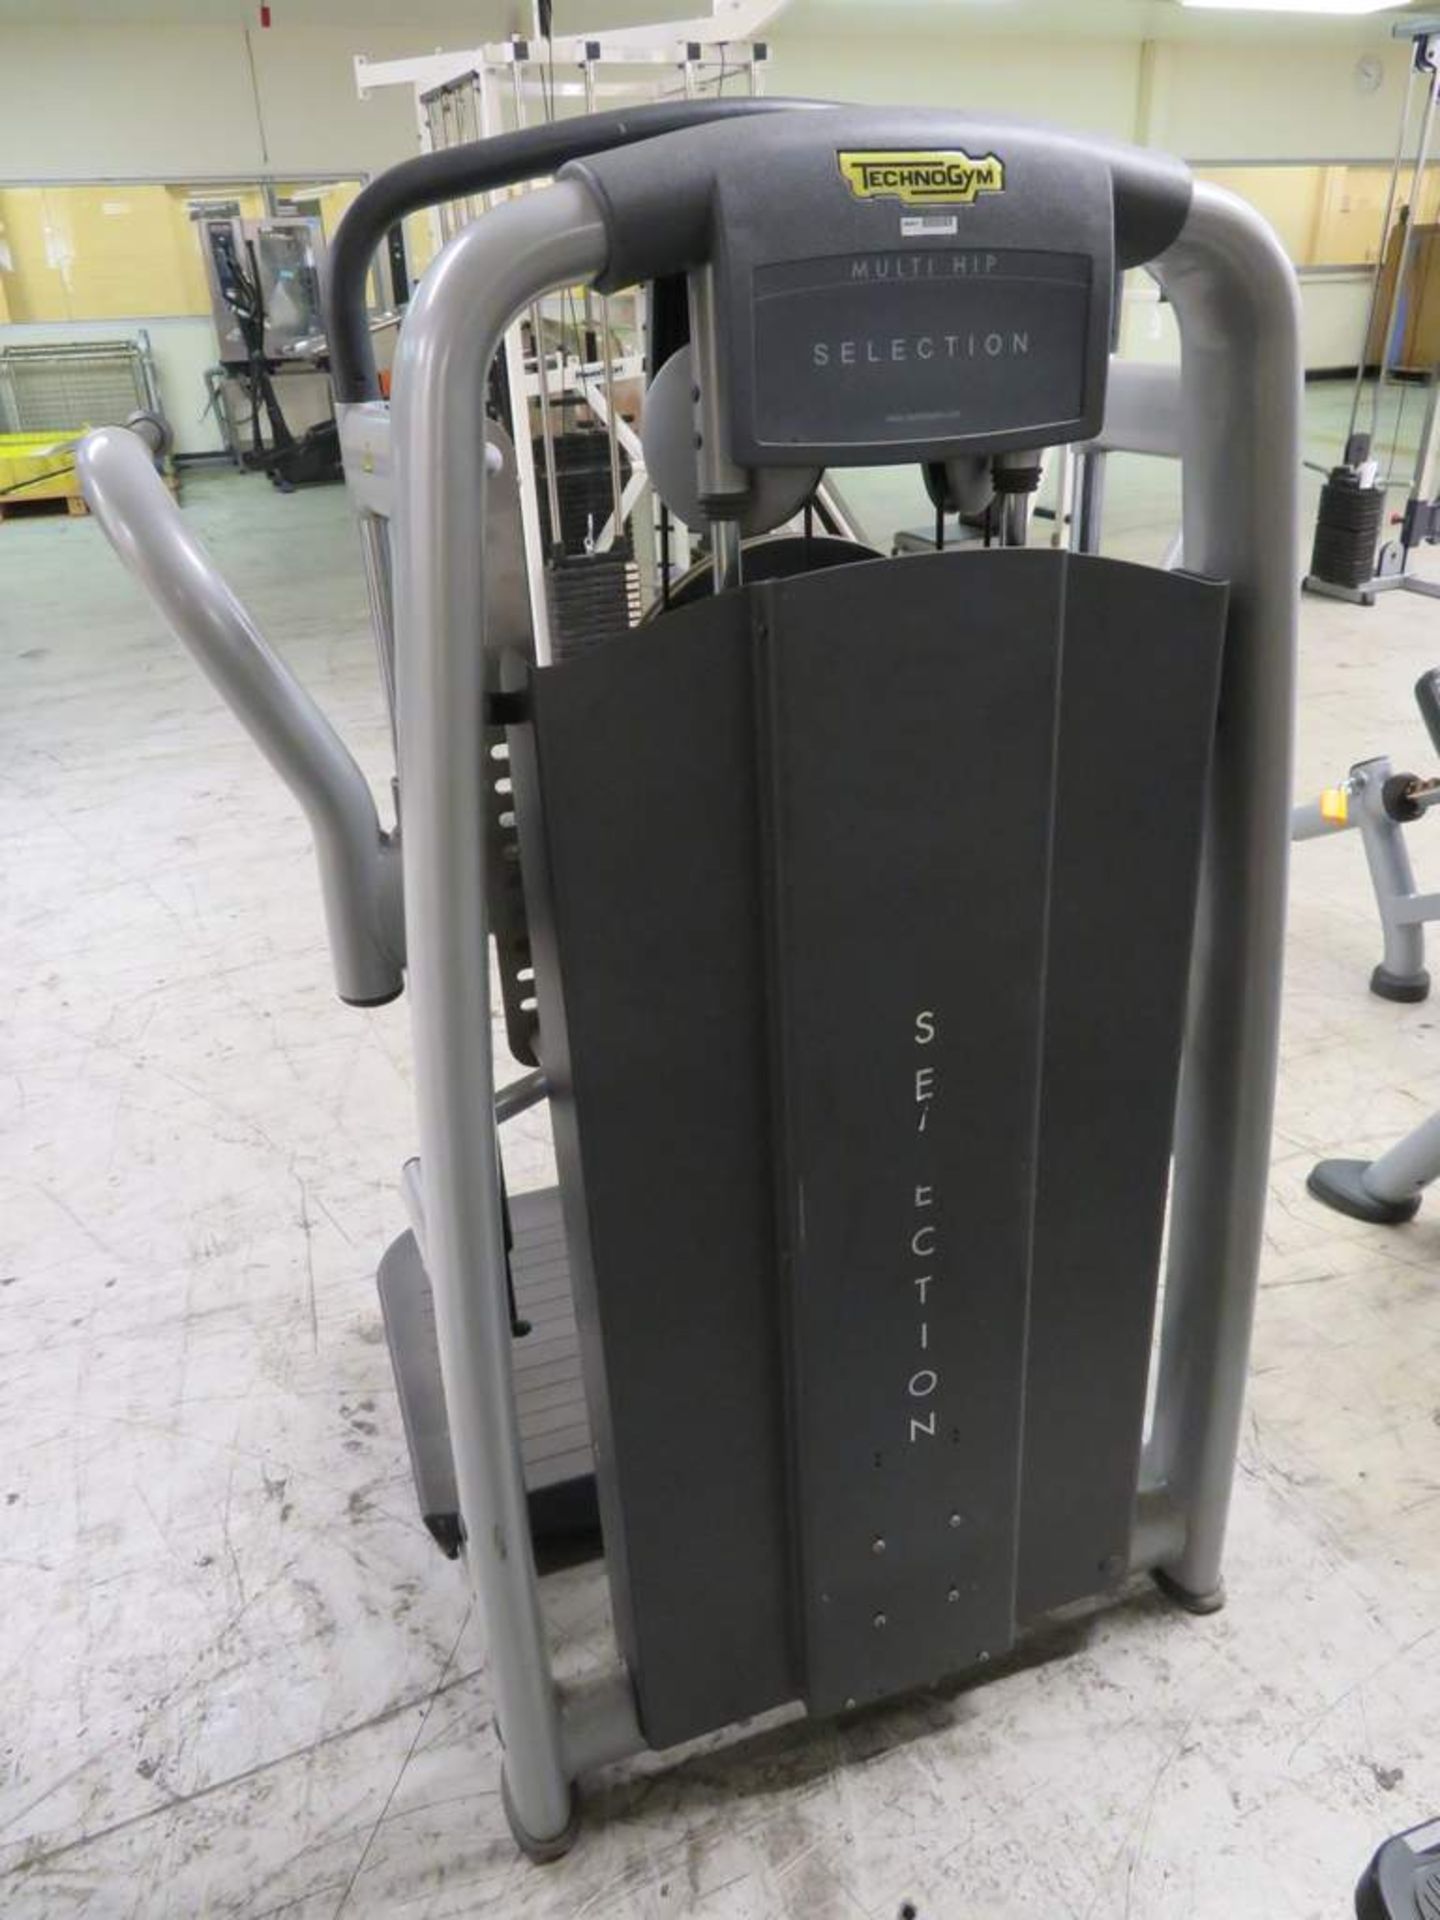 Technogym, Model: Selection Series, Multi Hip Exercise Station. - Image 6 of 6